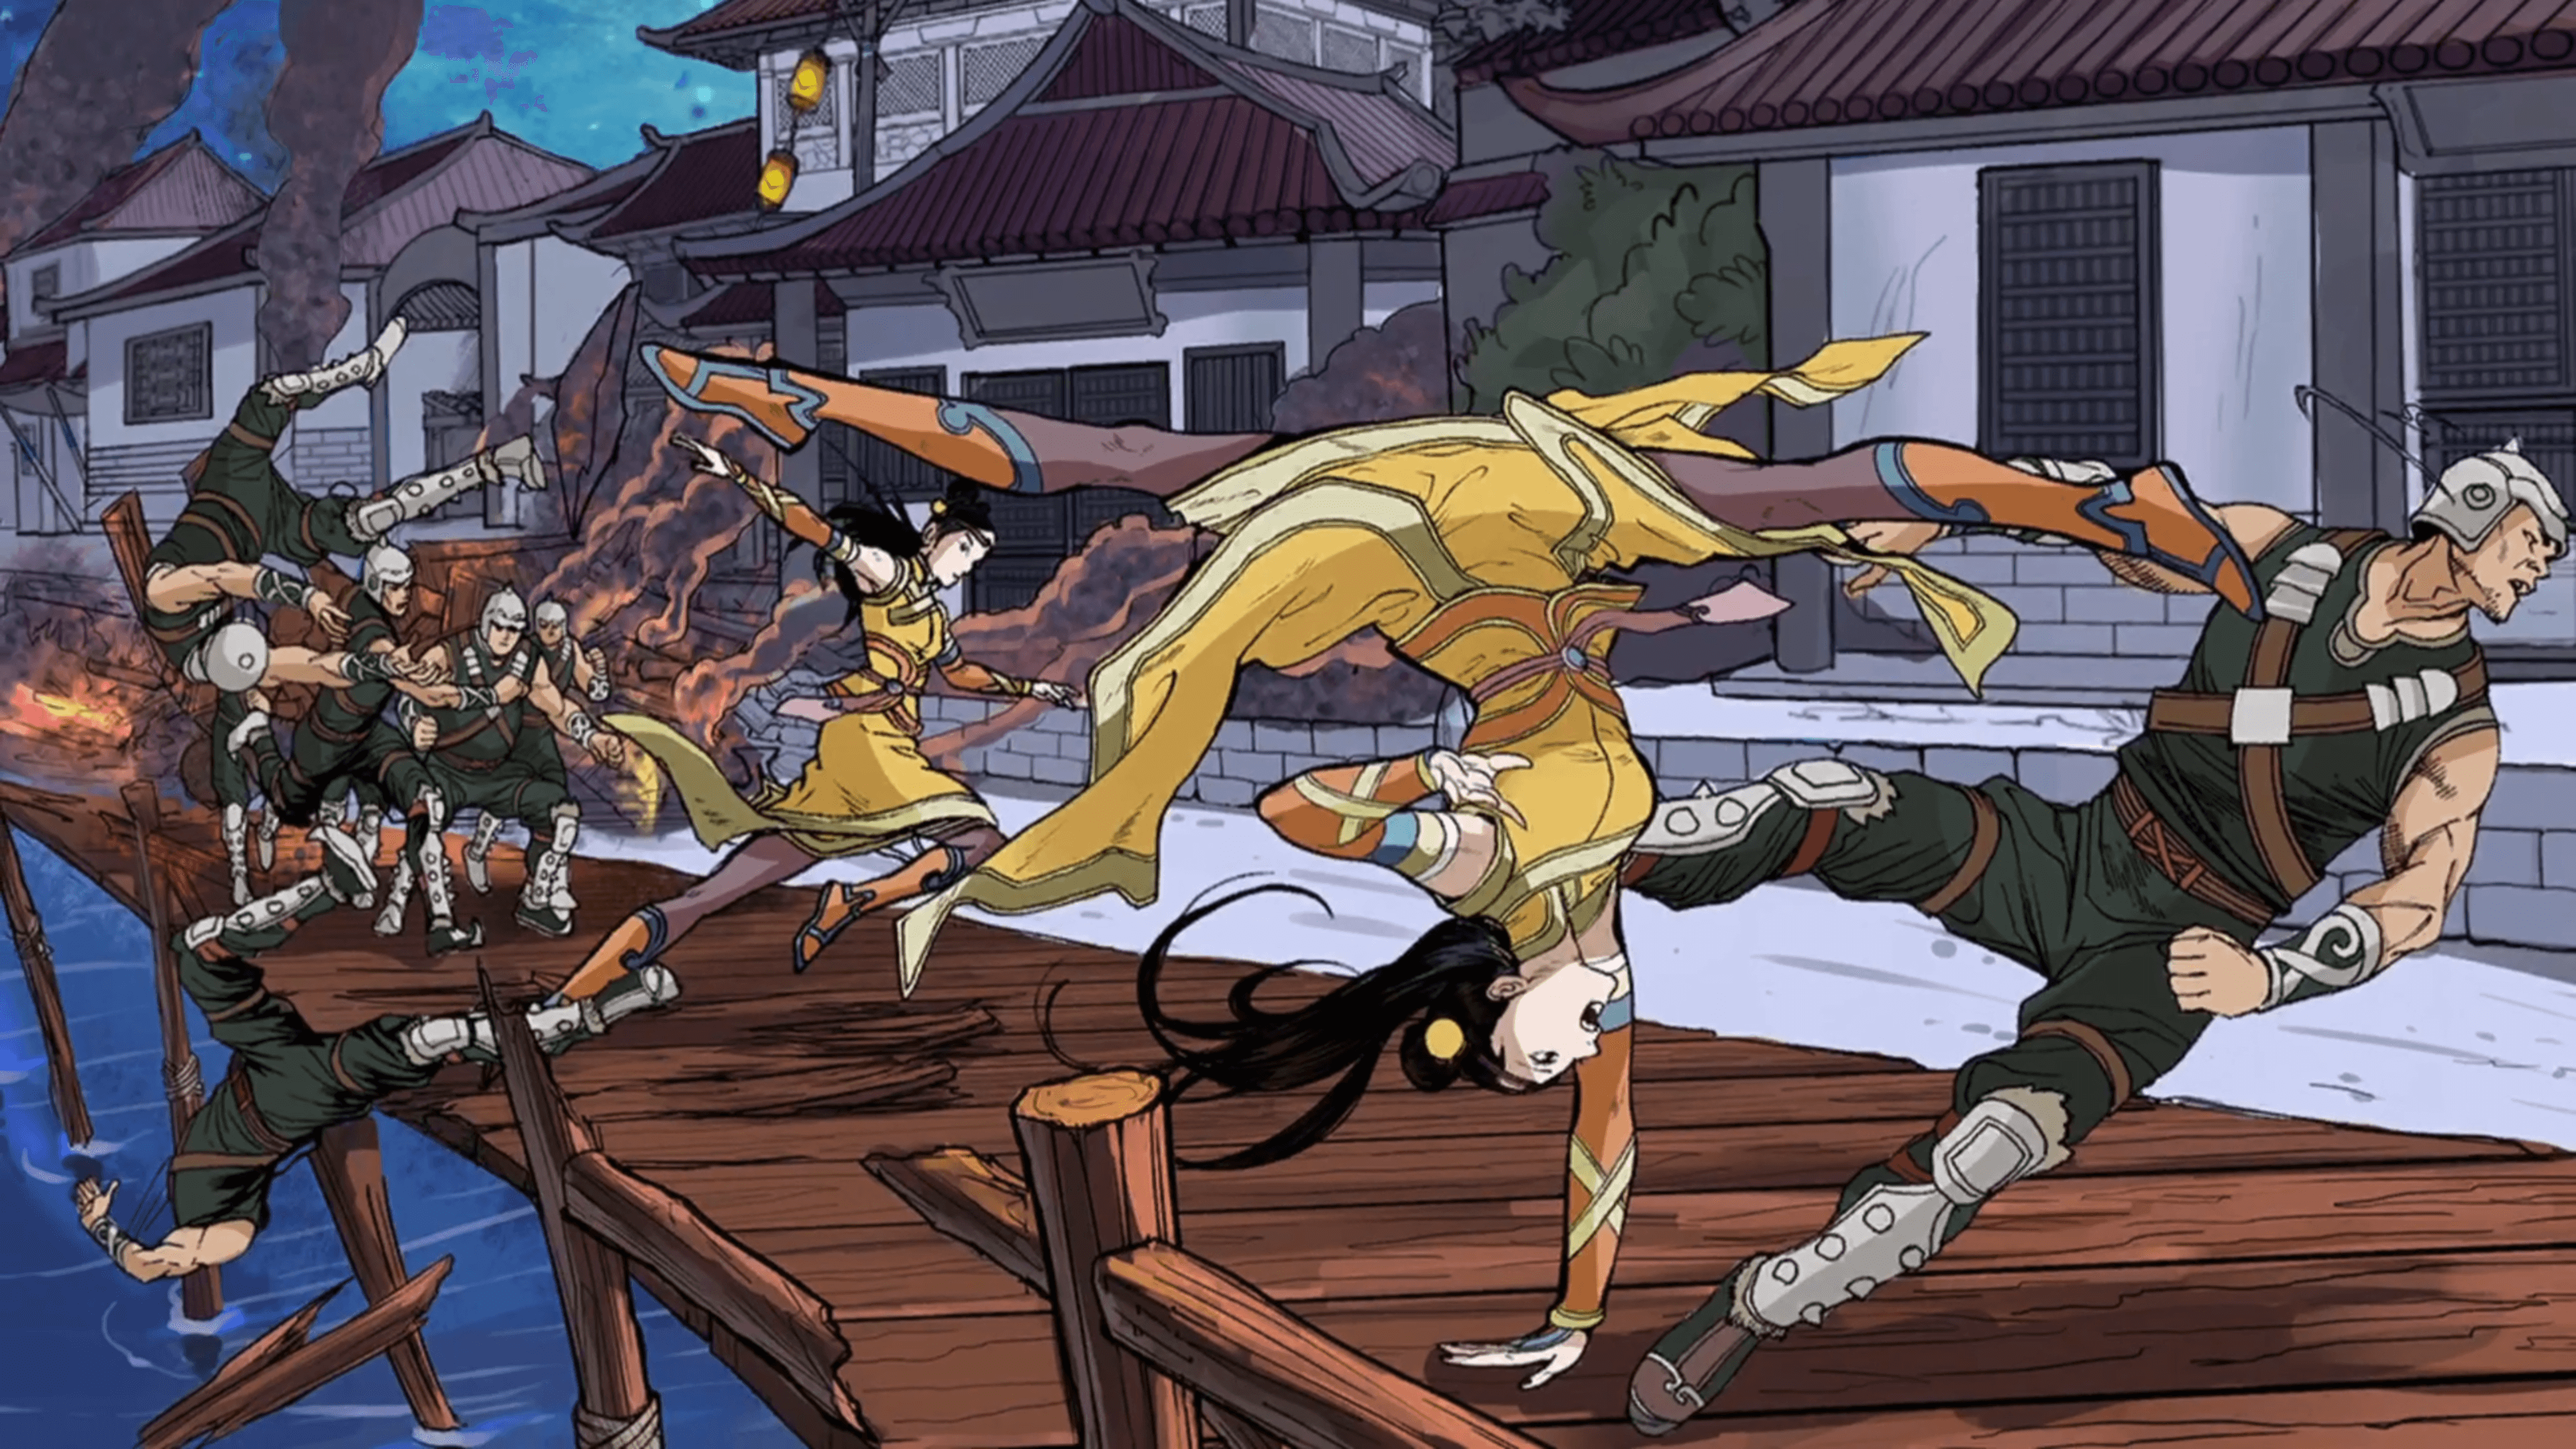 A young girl being perused by a group of soldiers on a wooden pier delivers an inverted spinning kick to a soldier as she performs a sort of one handed cartwheel. The girl is dressed in a flowing yellow and orange outfit. The background shows traditional Chinese style dwellings